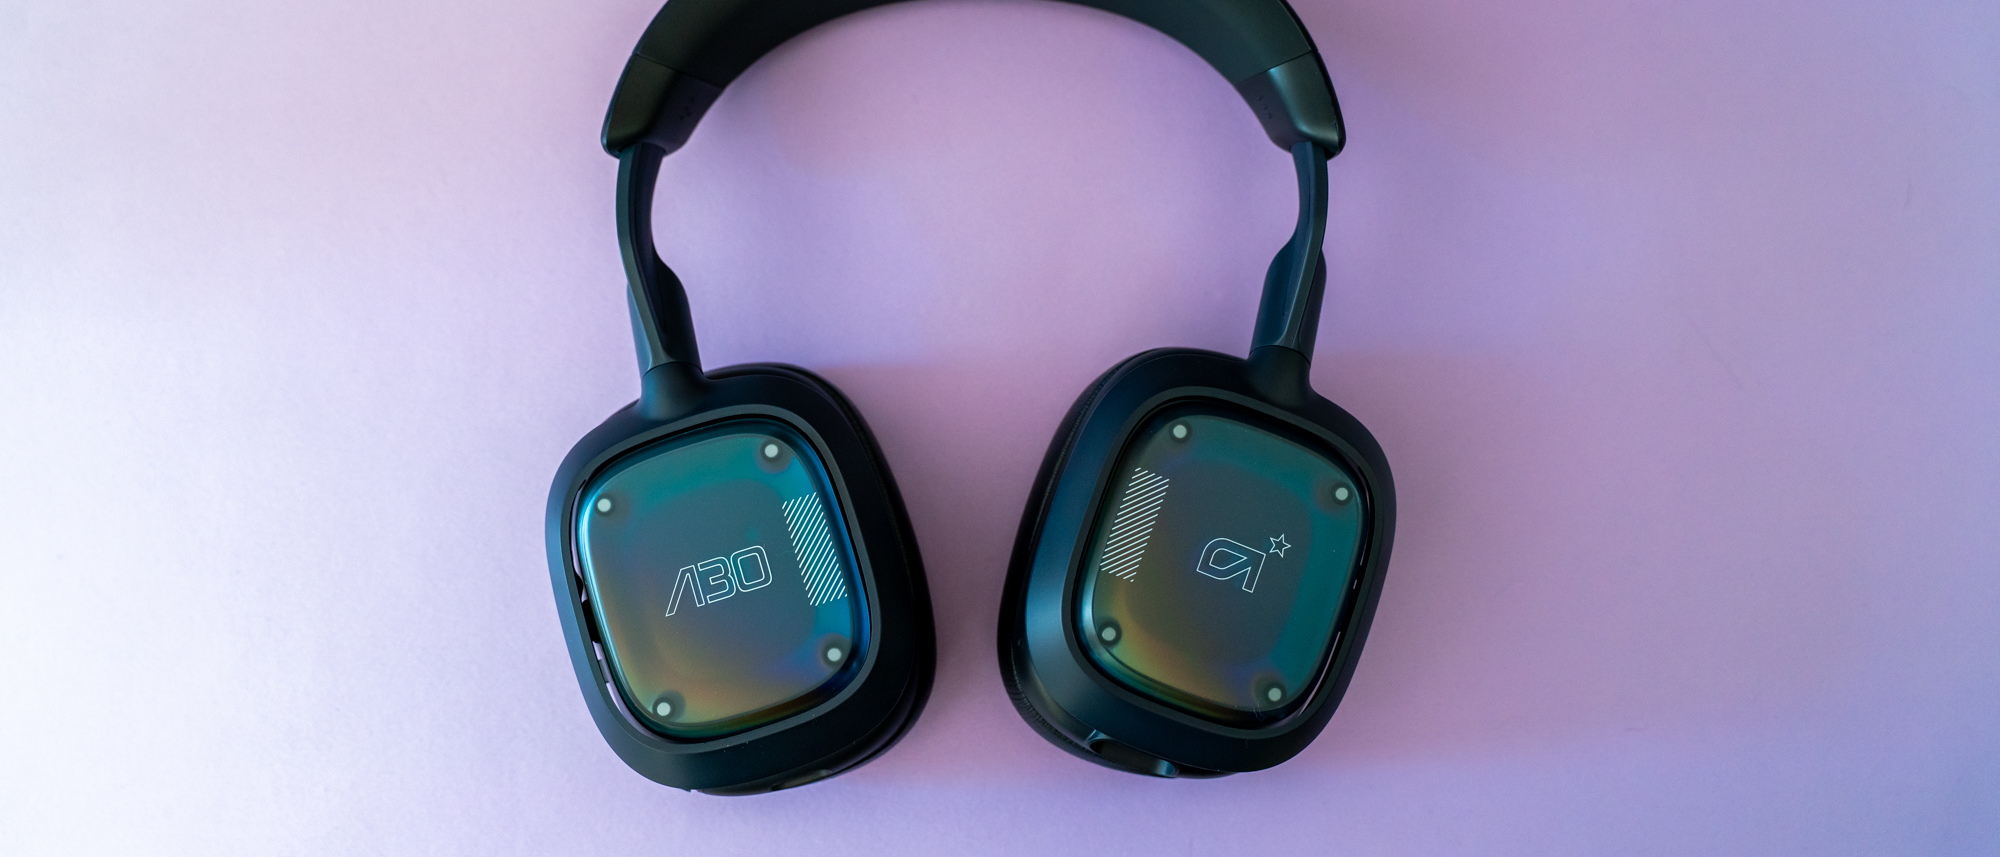 Logitech G Astro A30 Wireless Gaming Headset Review: The Biggest